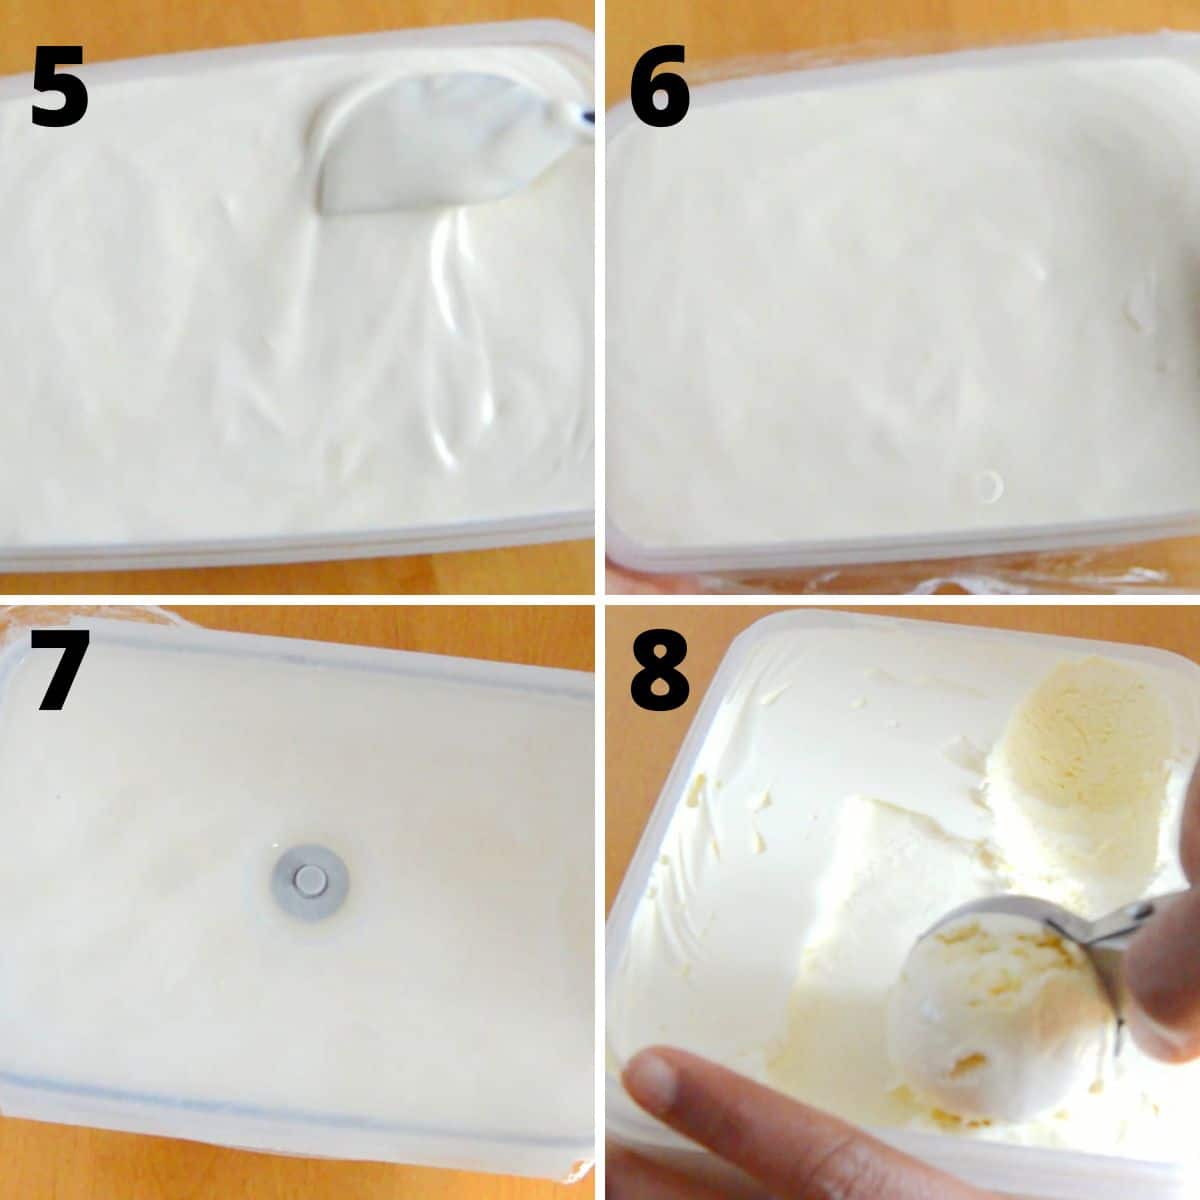 college of 4 images with top left image of a spreading icecream in plastic box with spatula, top right image of covering box with plastic wrap, bottom left image of covering box with a lid and bottom right image of scooping icecream from a box.